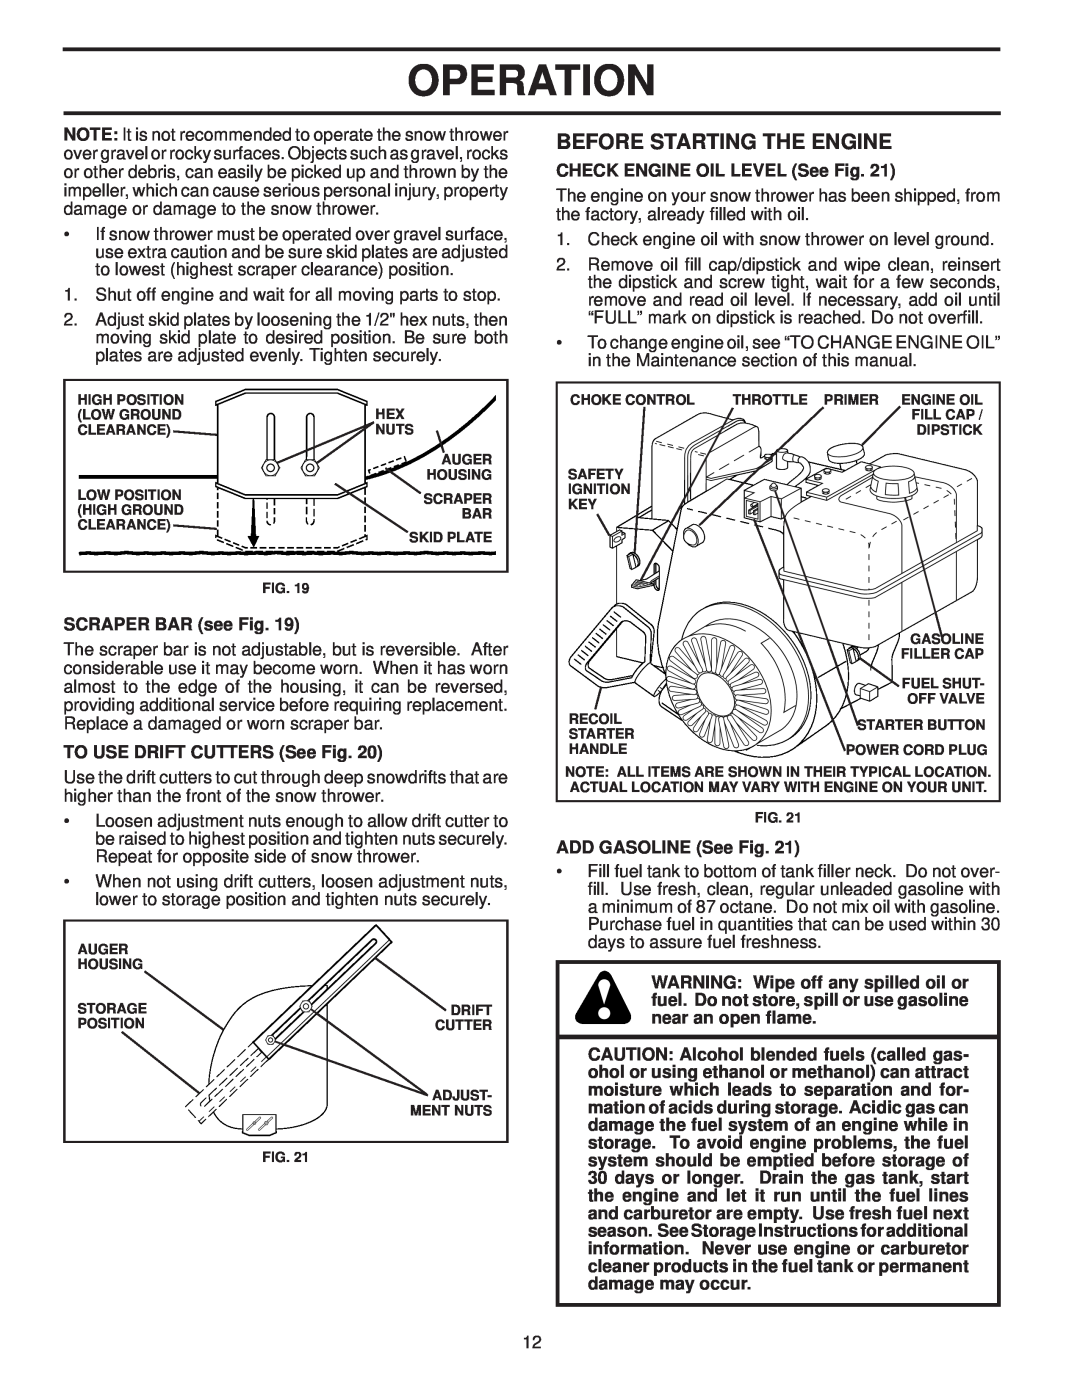 Husqvarna 96193002300 manual Before Starting The Engine, Operation, CHECK ENGINE OIL LEVEL See Fig, SCRAPER BAR see Fig 